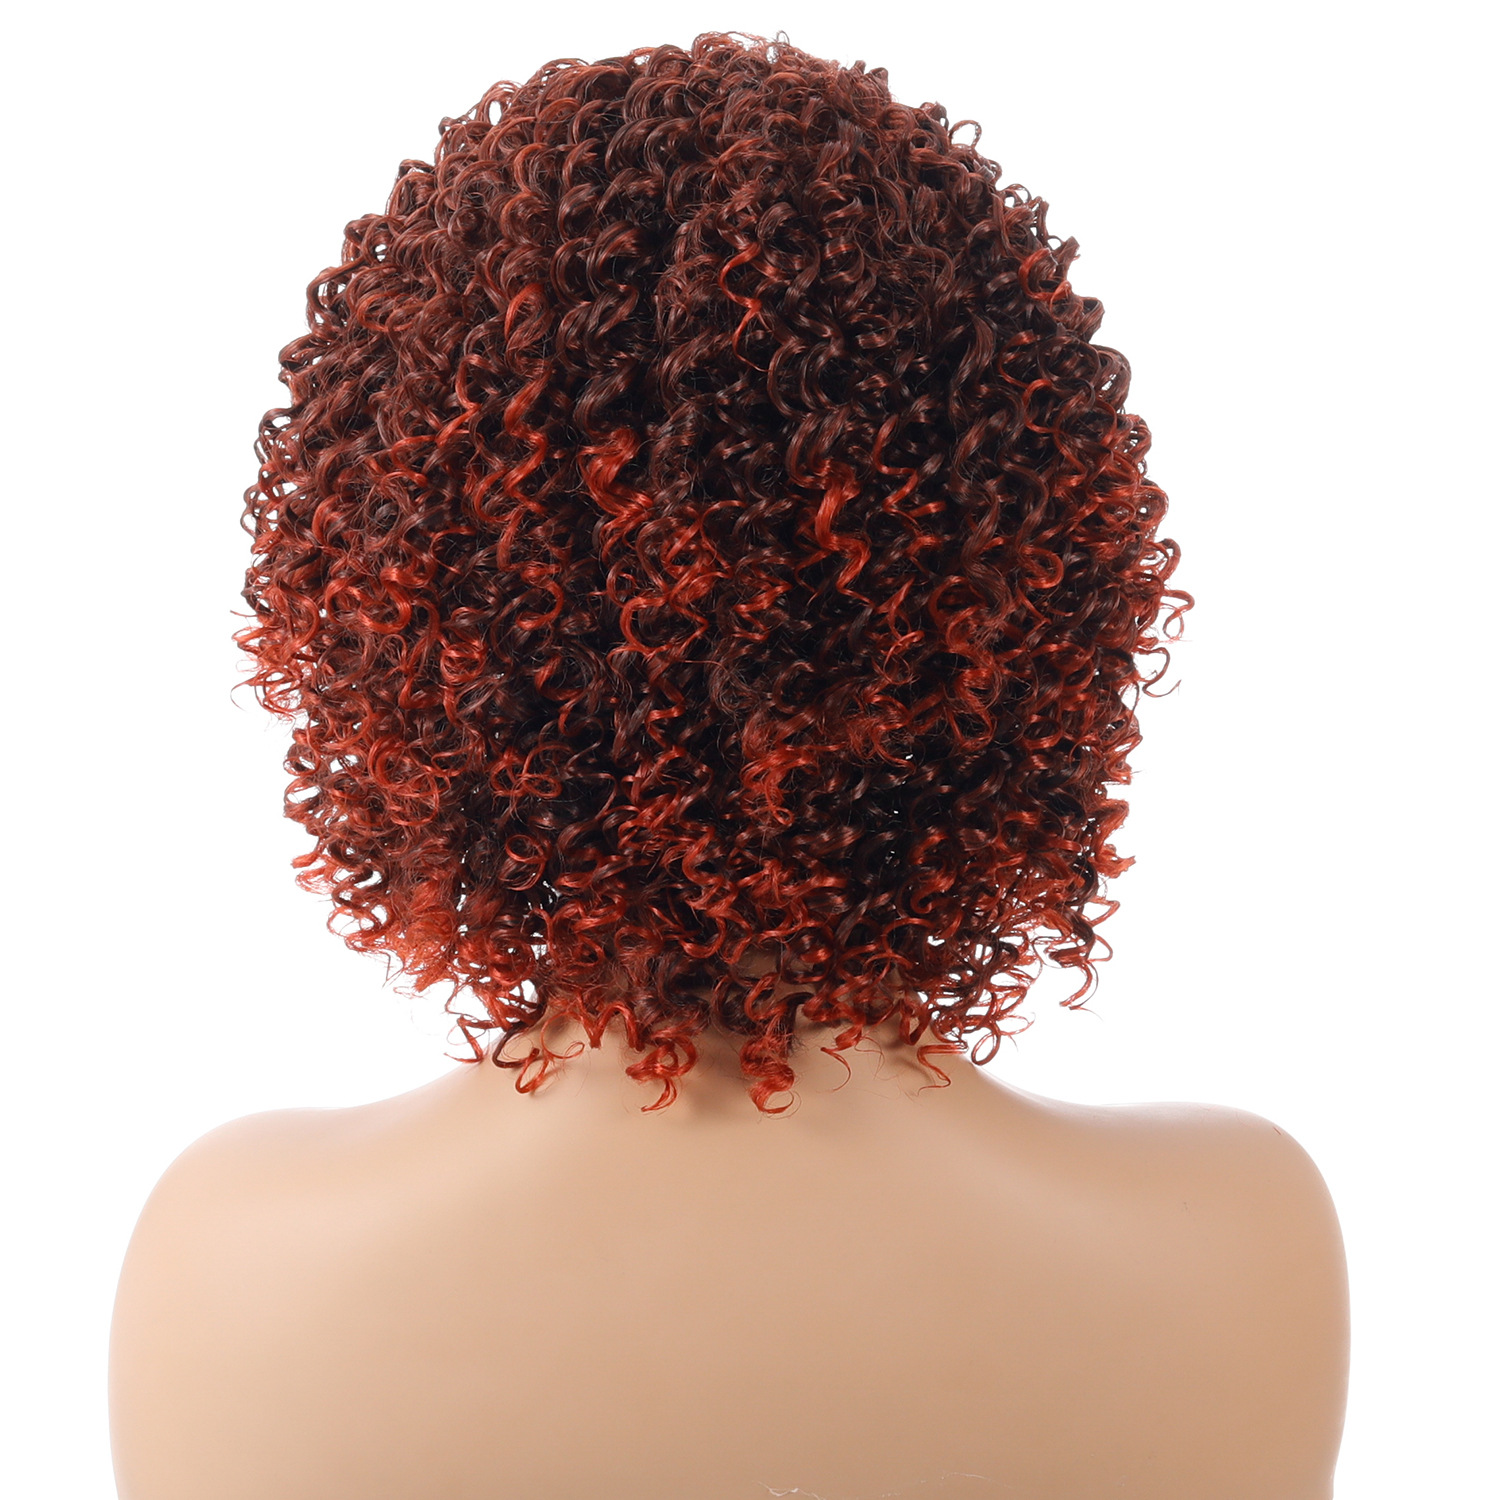 A wig with small, curly hair strands in vibrant, multicolored hues